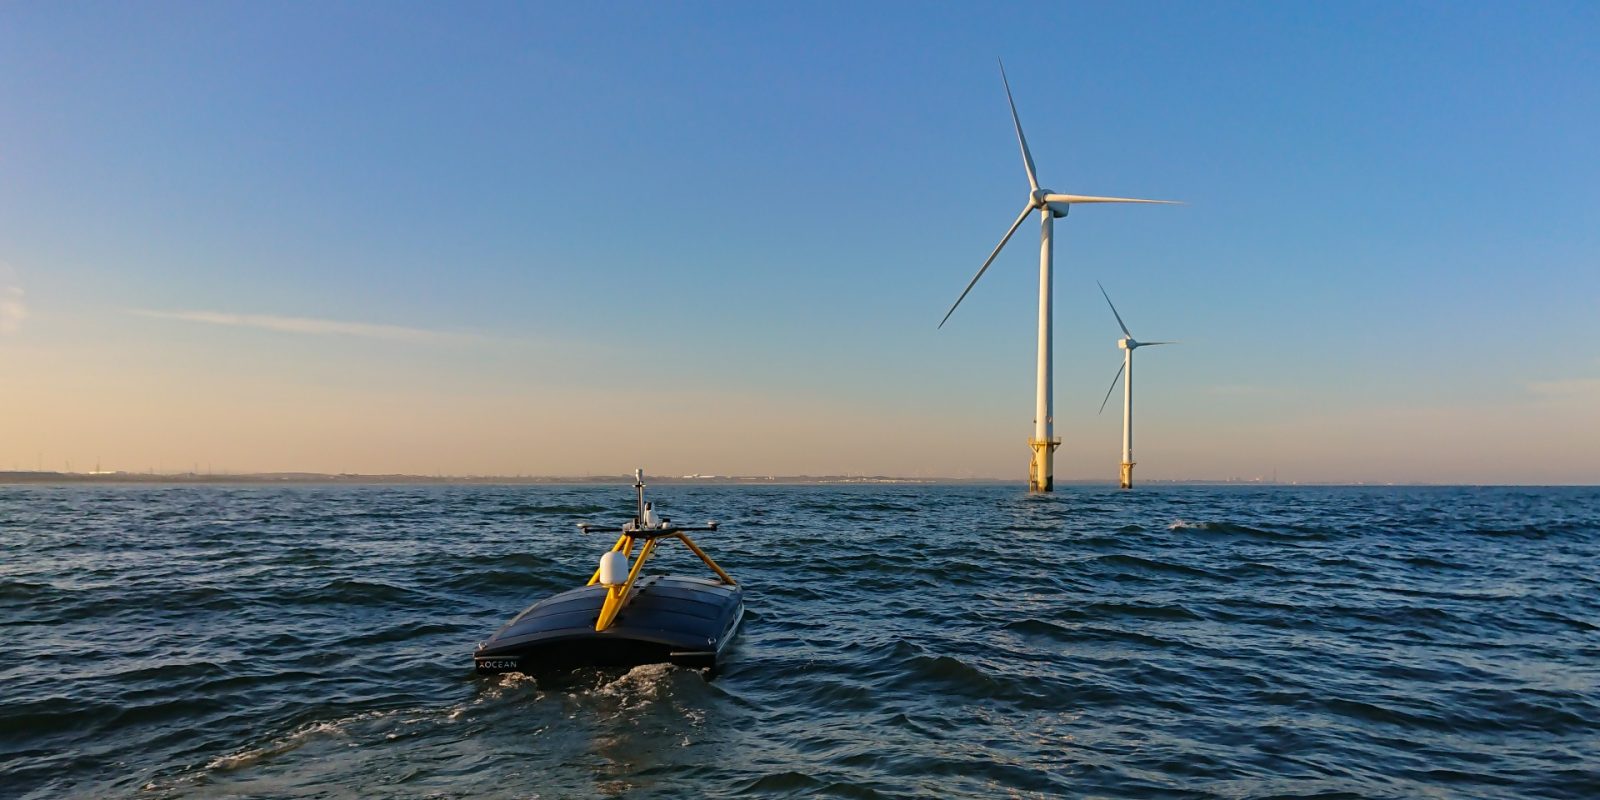 Robotic boats offshore wind farms